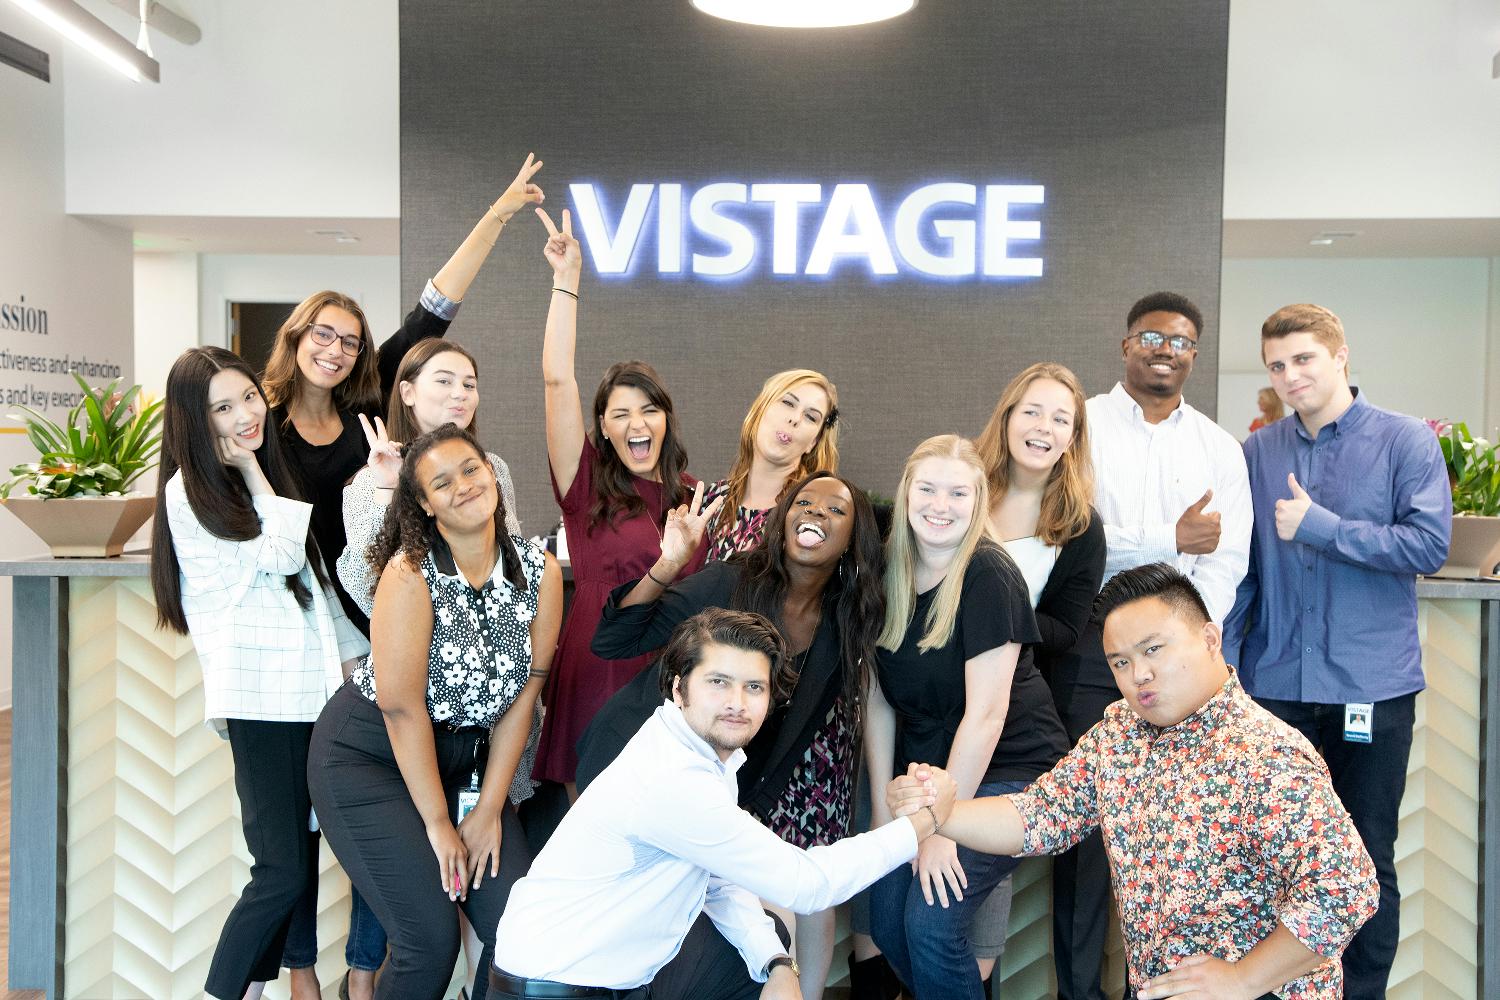 We just love our interns! Our 2020 intern cohort added so much fun and made an incredible impact on our business.